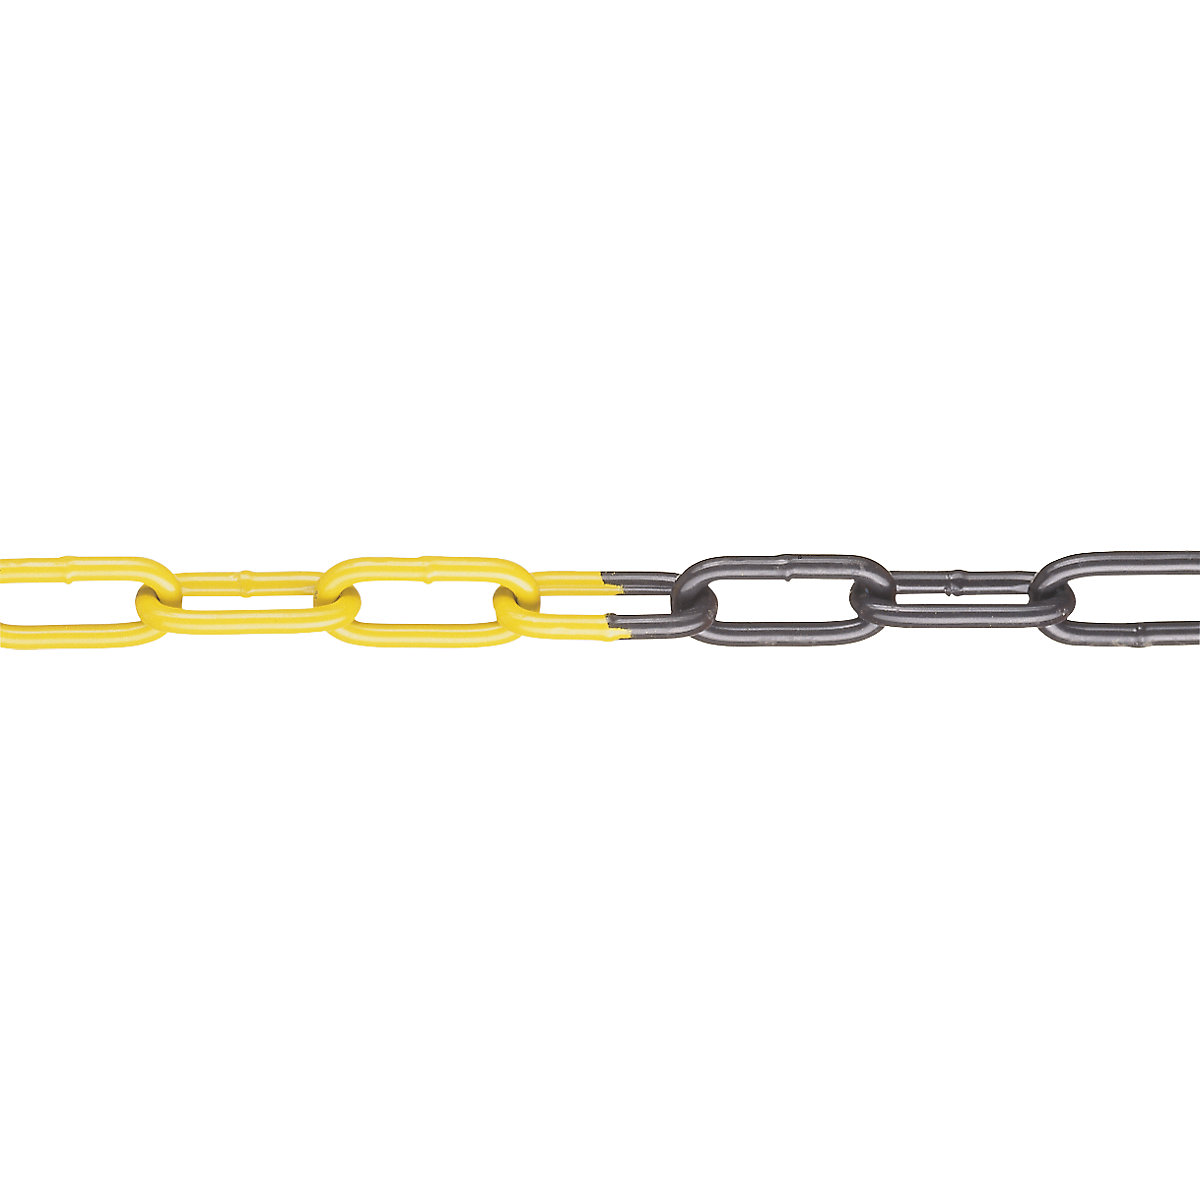 Signal barrier chain, made of plastic coated steel, 15 m, black/yellow-3